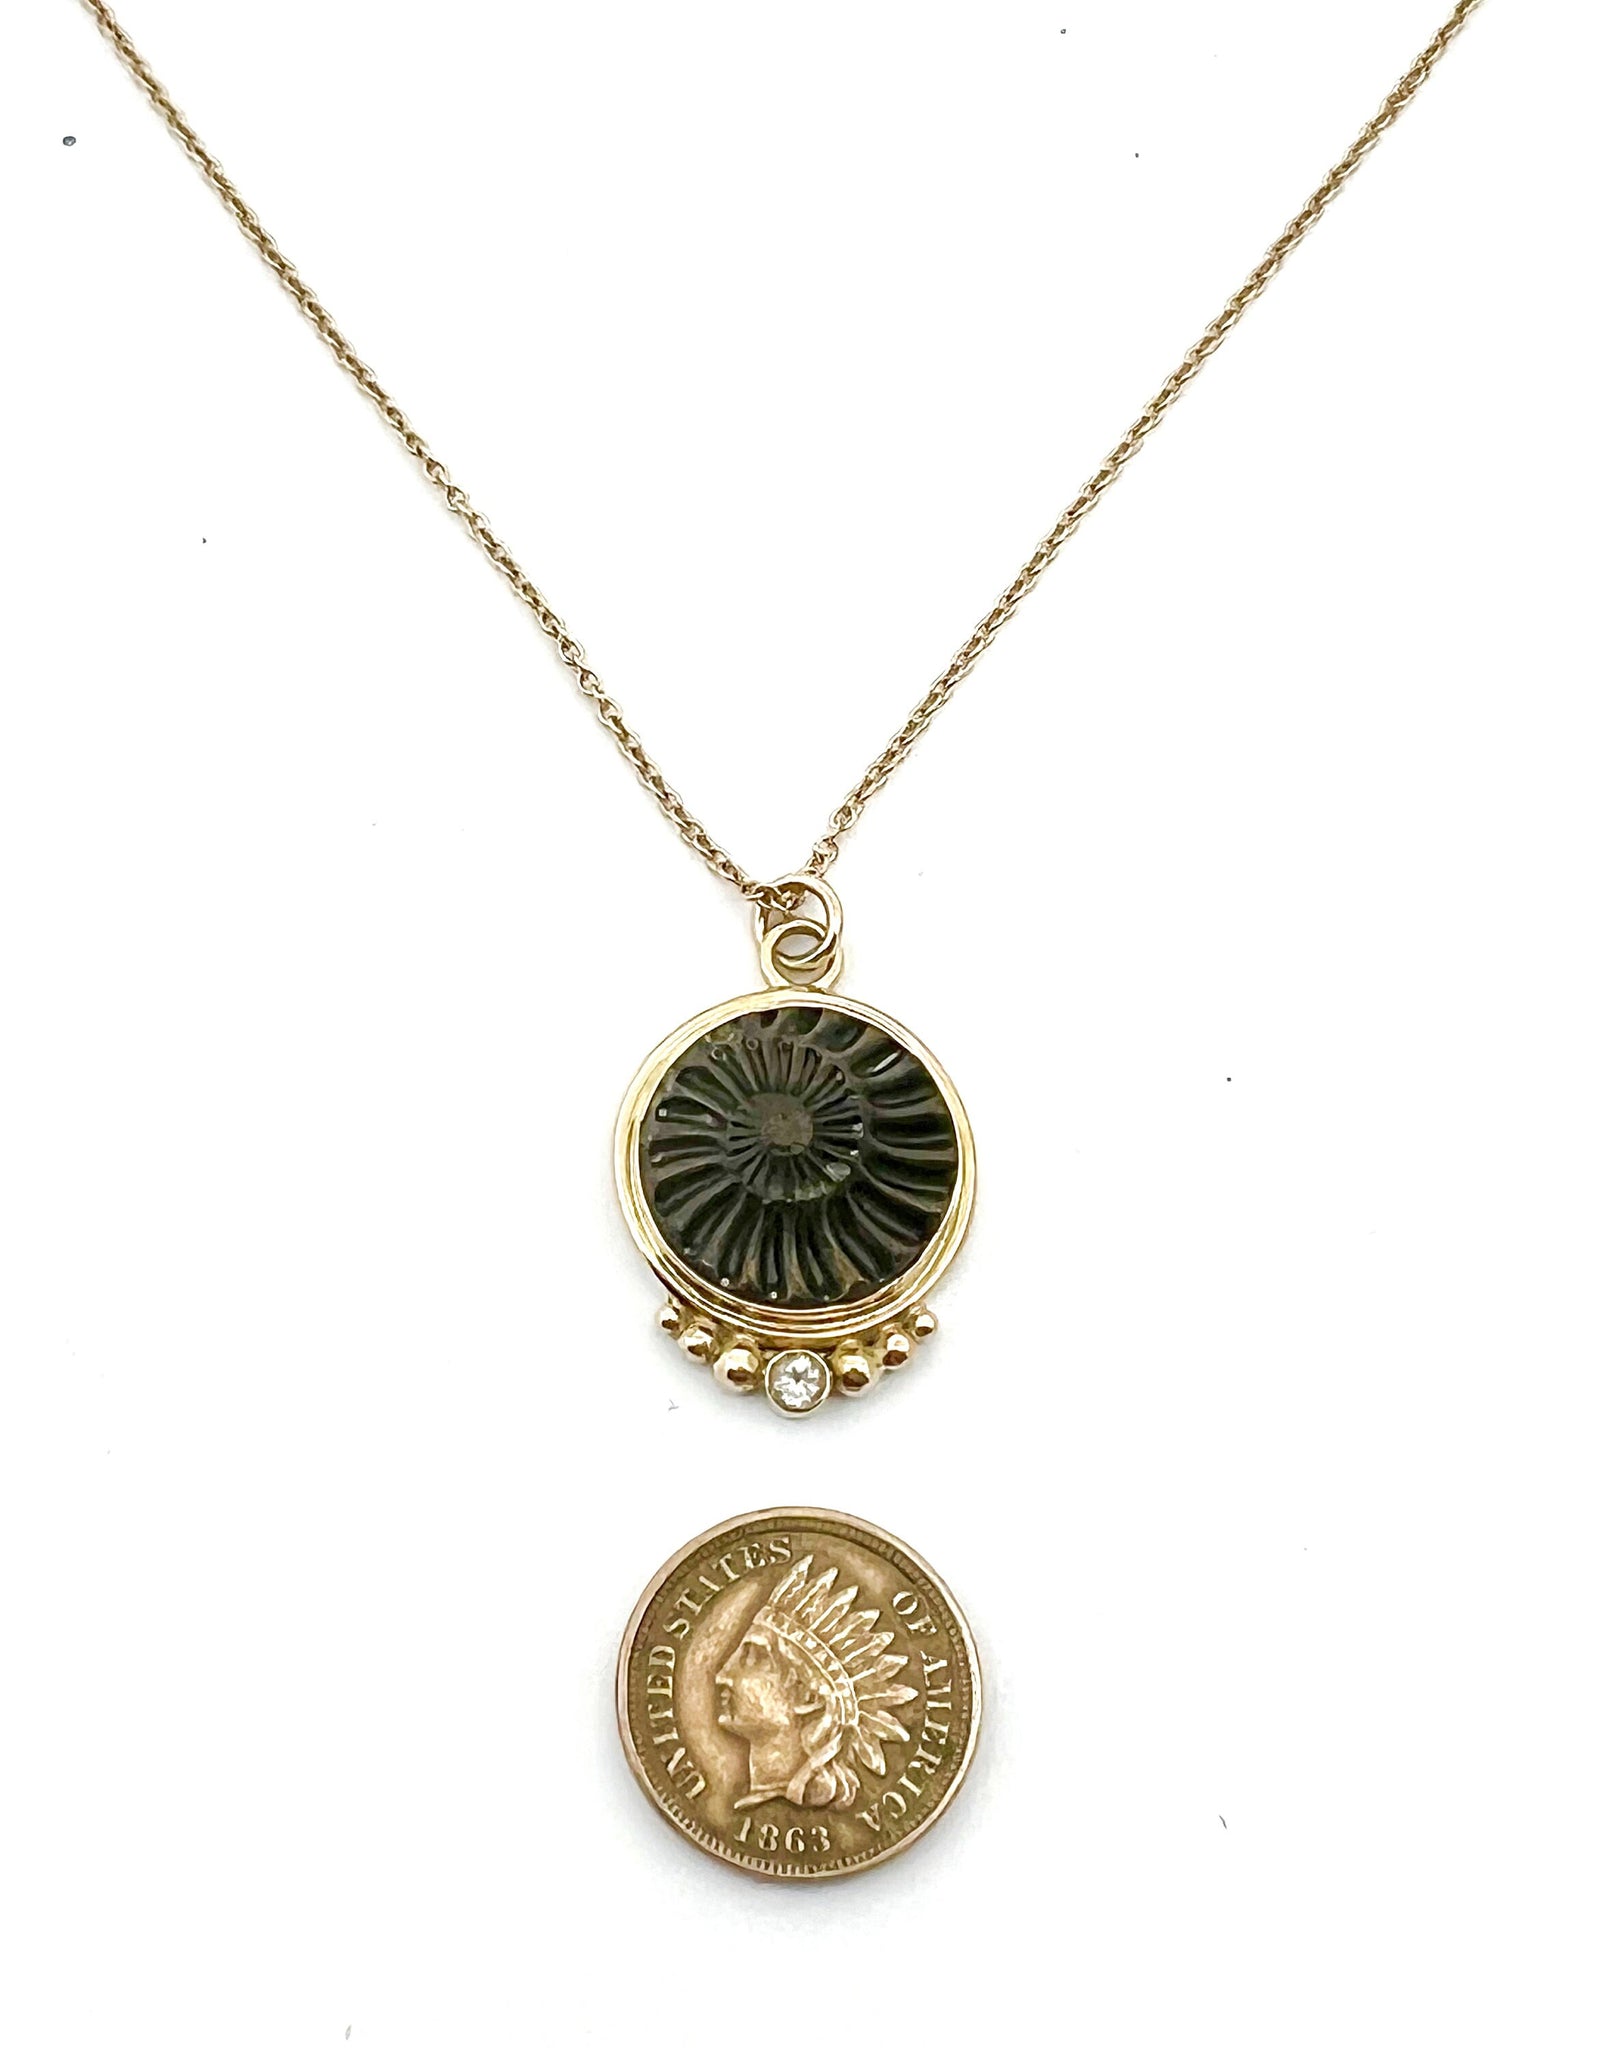 Ammonite Negative in 14k Gold and Sterling Silver with Diamond Accent, OOAK Fossil Necklace